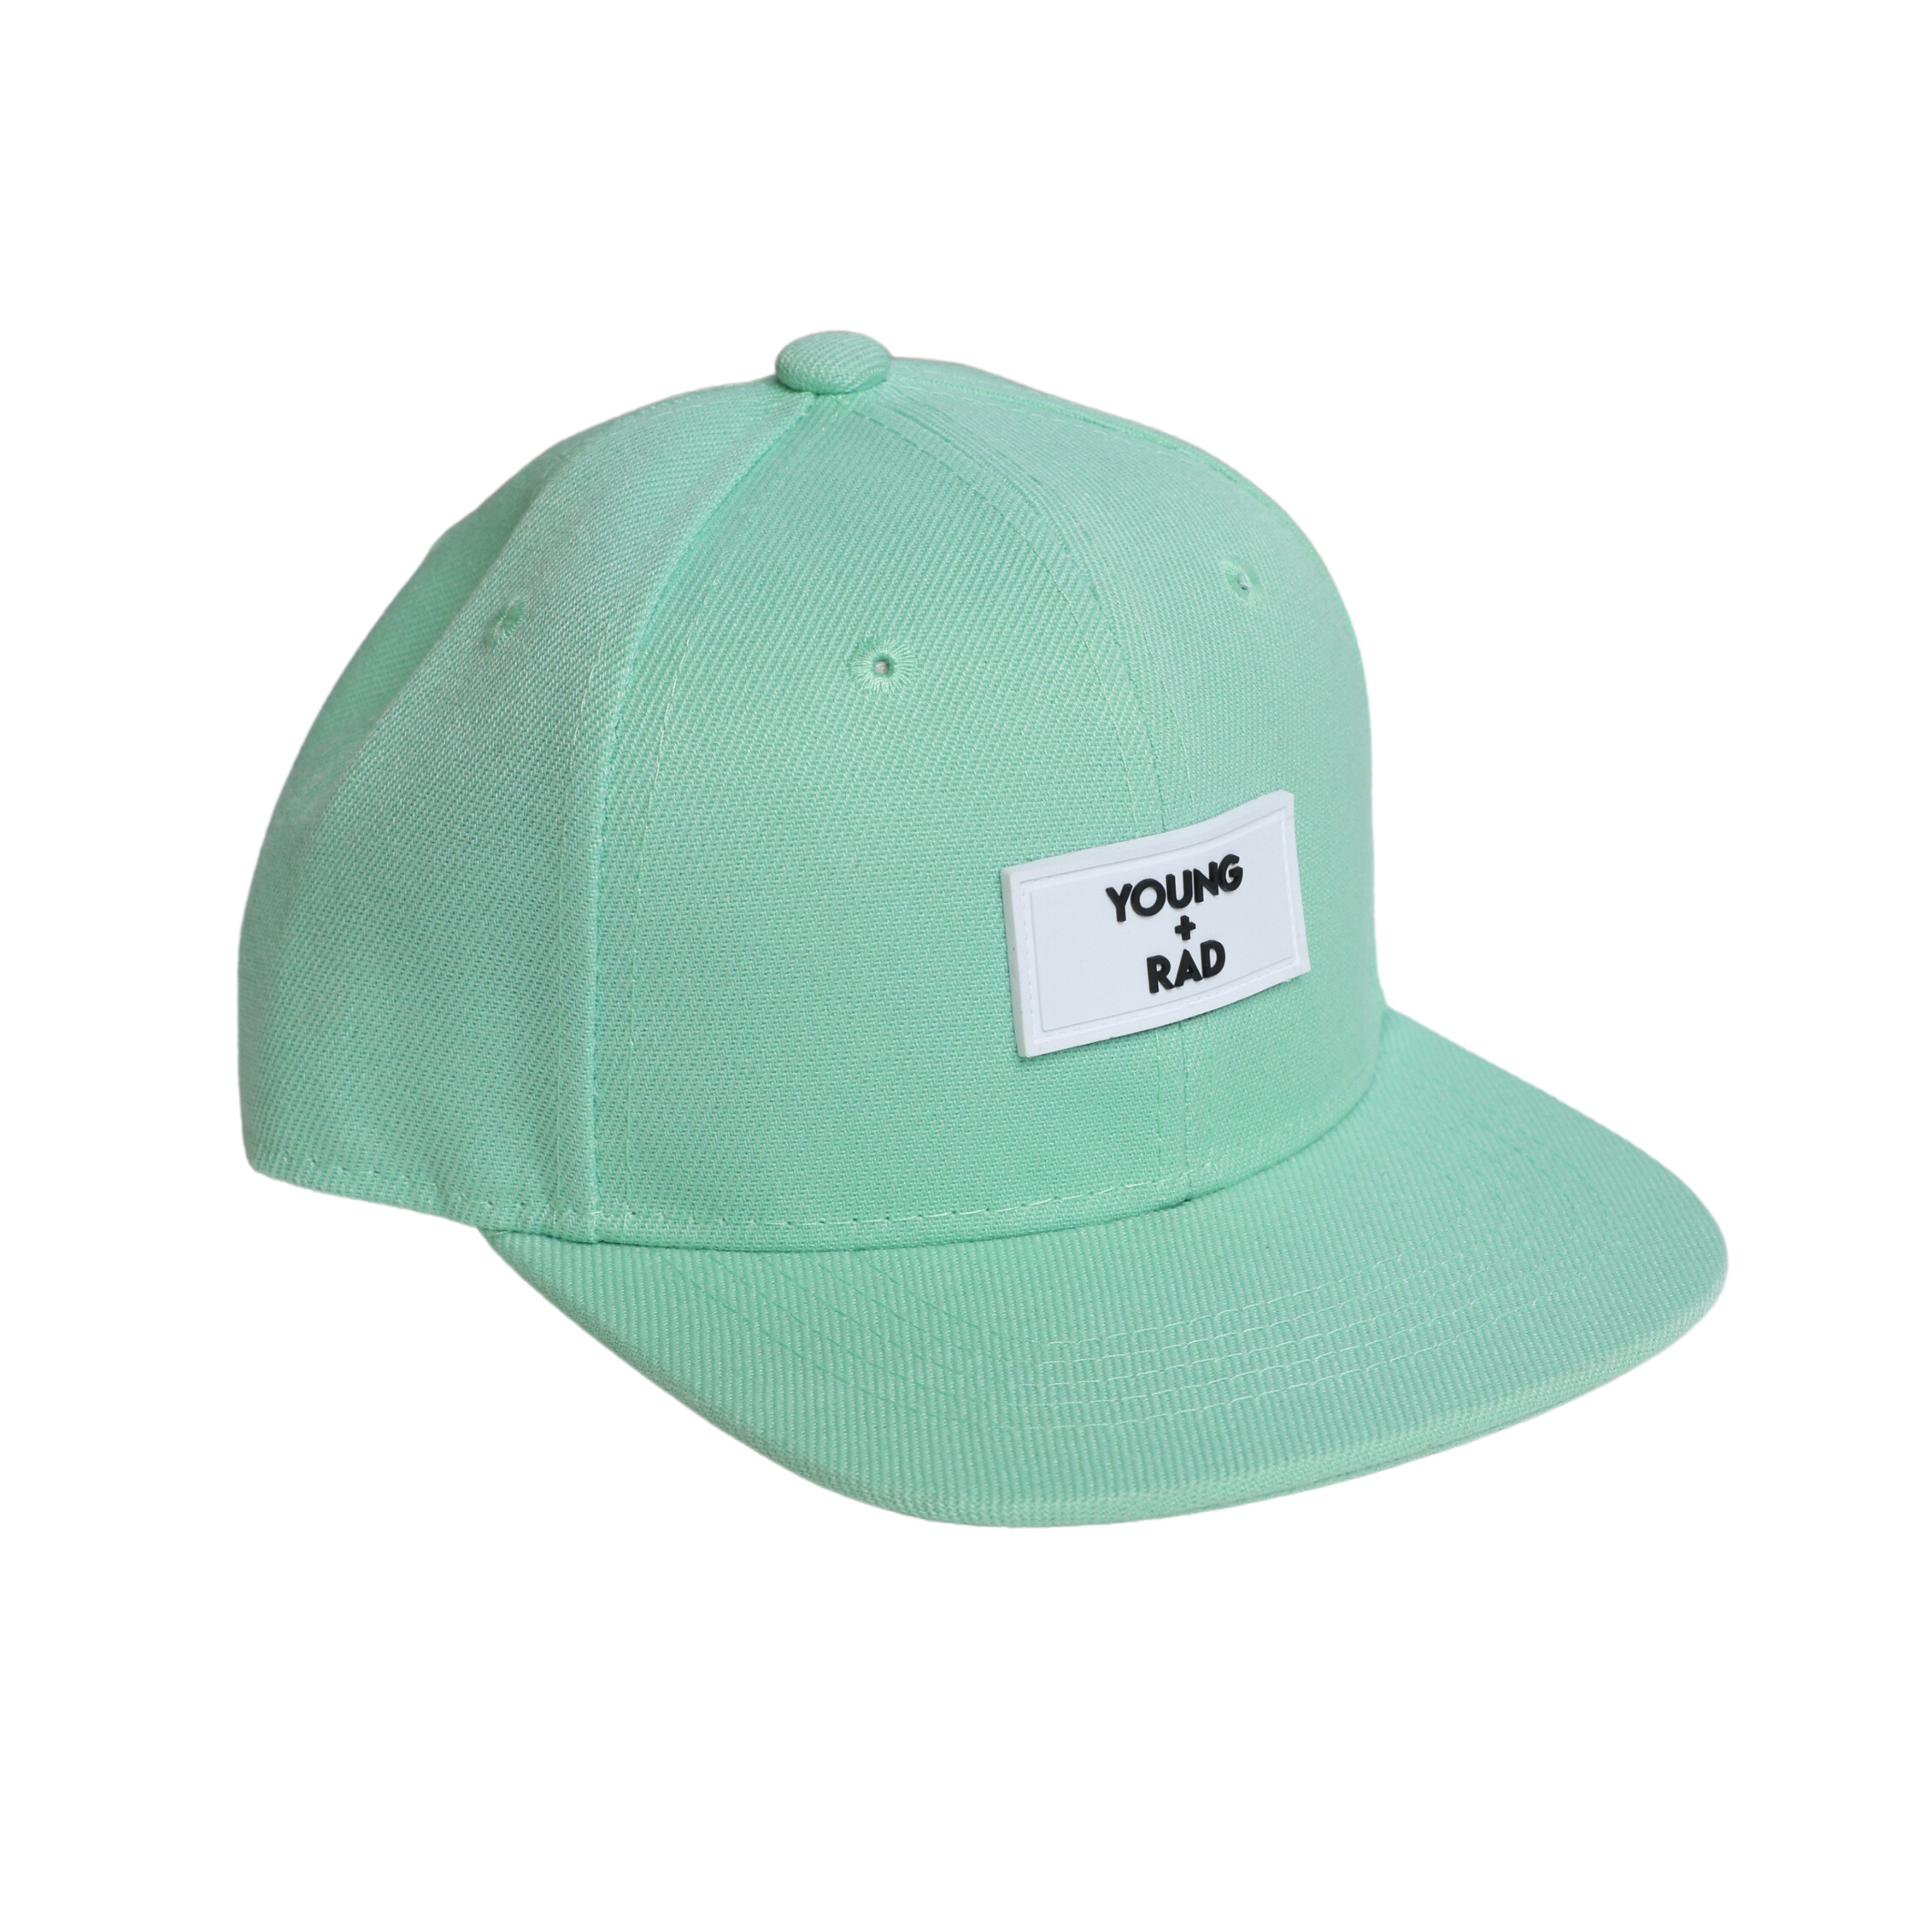 OUTER BANKS SNAPBACK